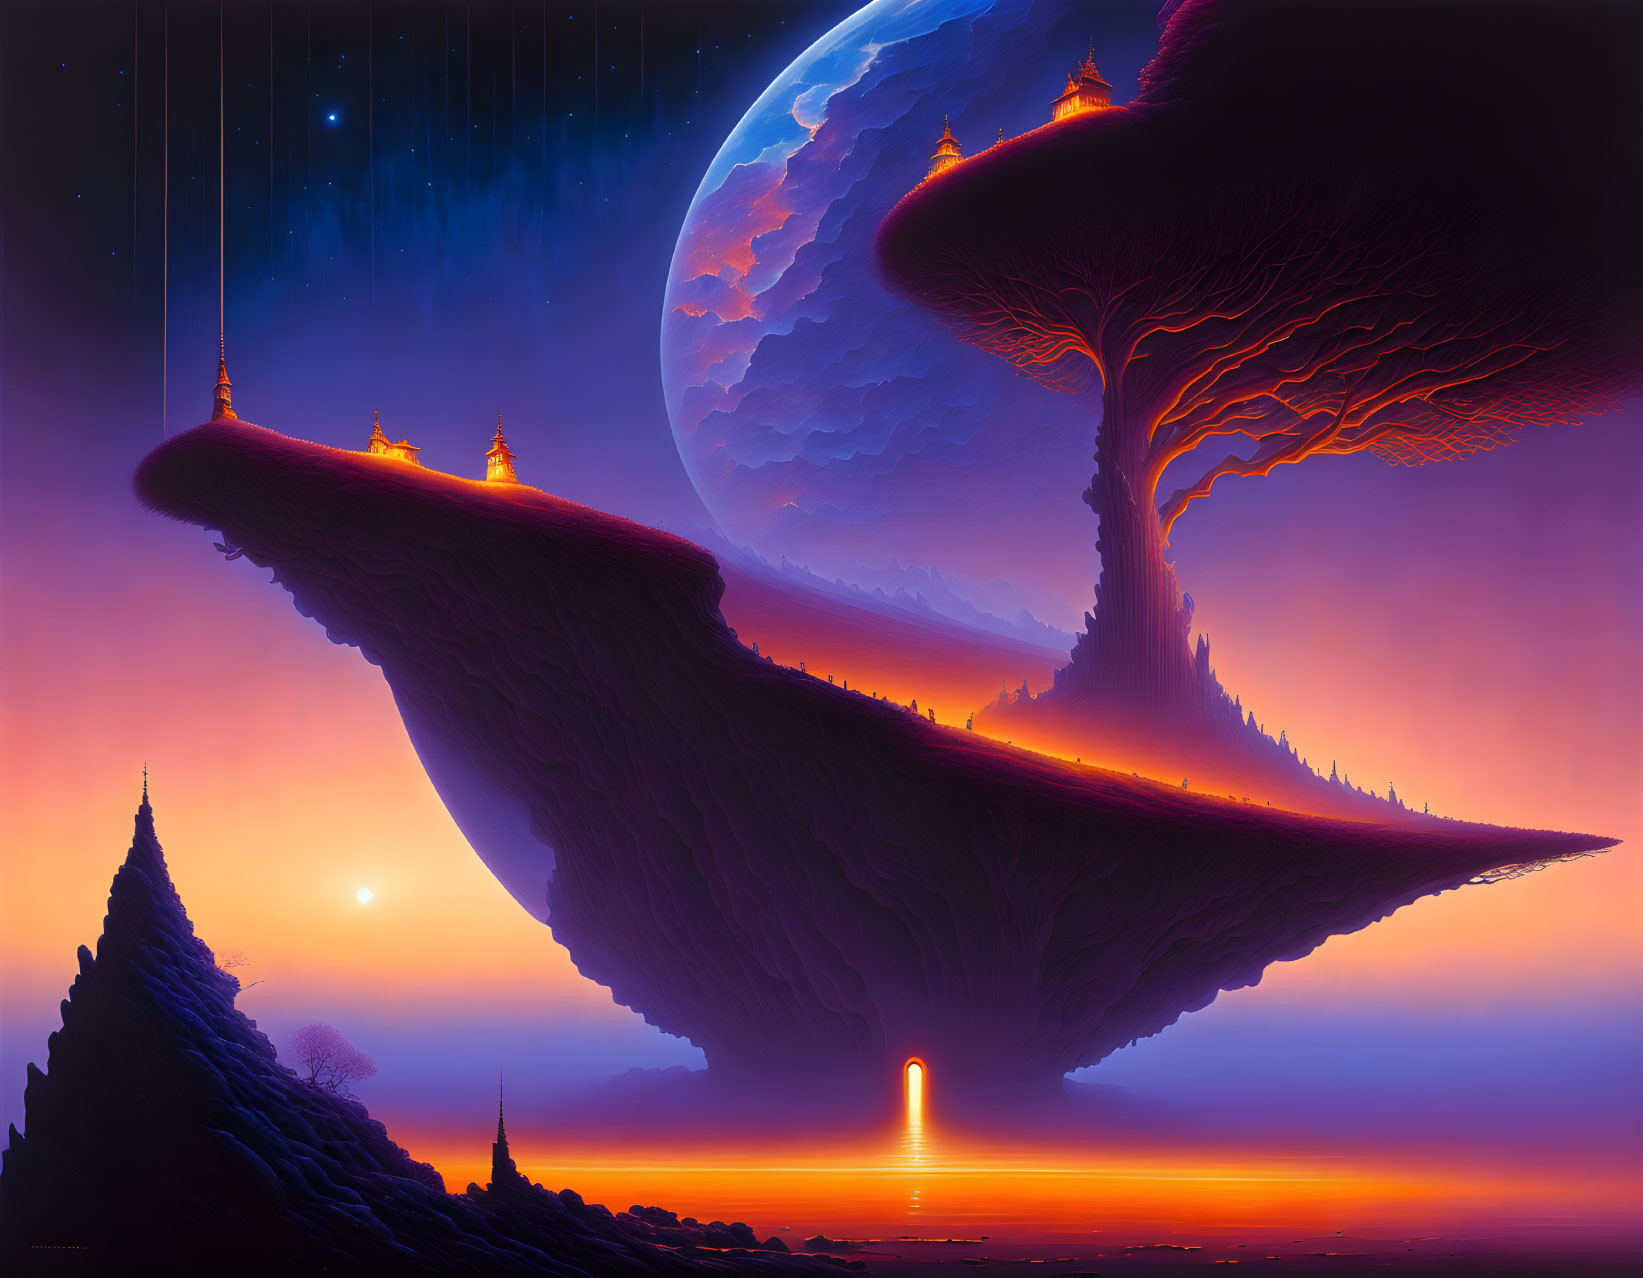 Fantastical landscape with giant floating tree island and glowing lava flow